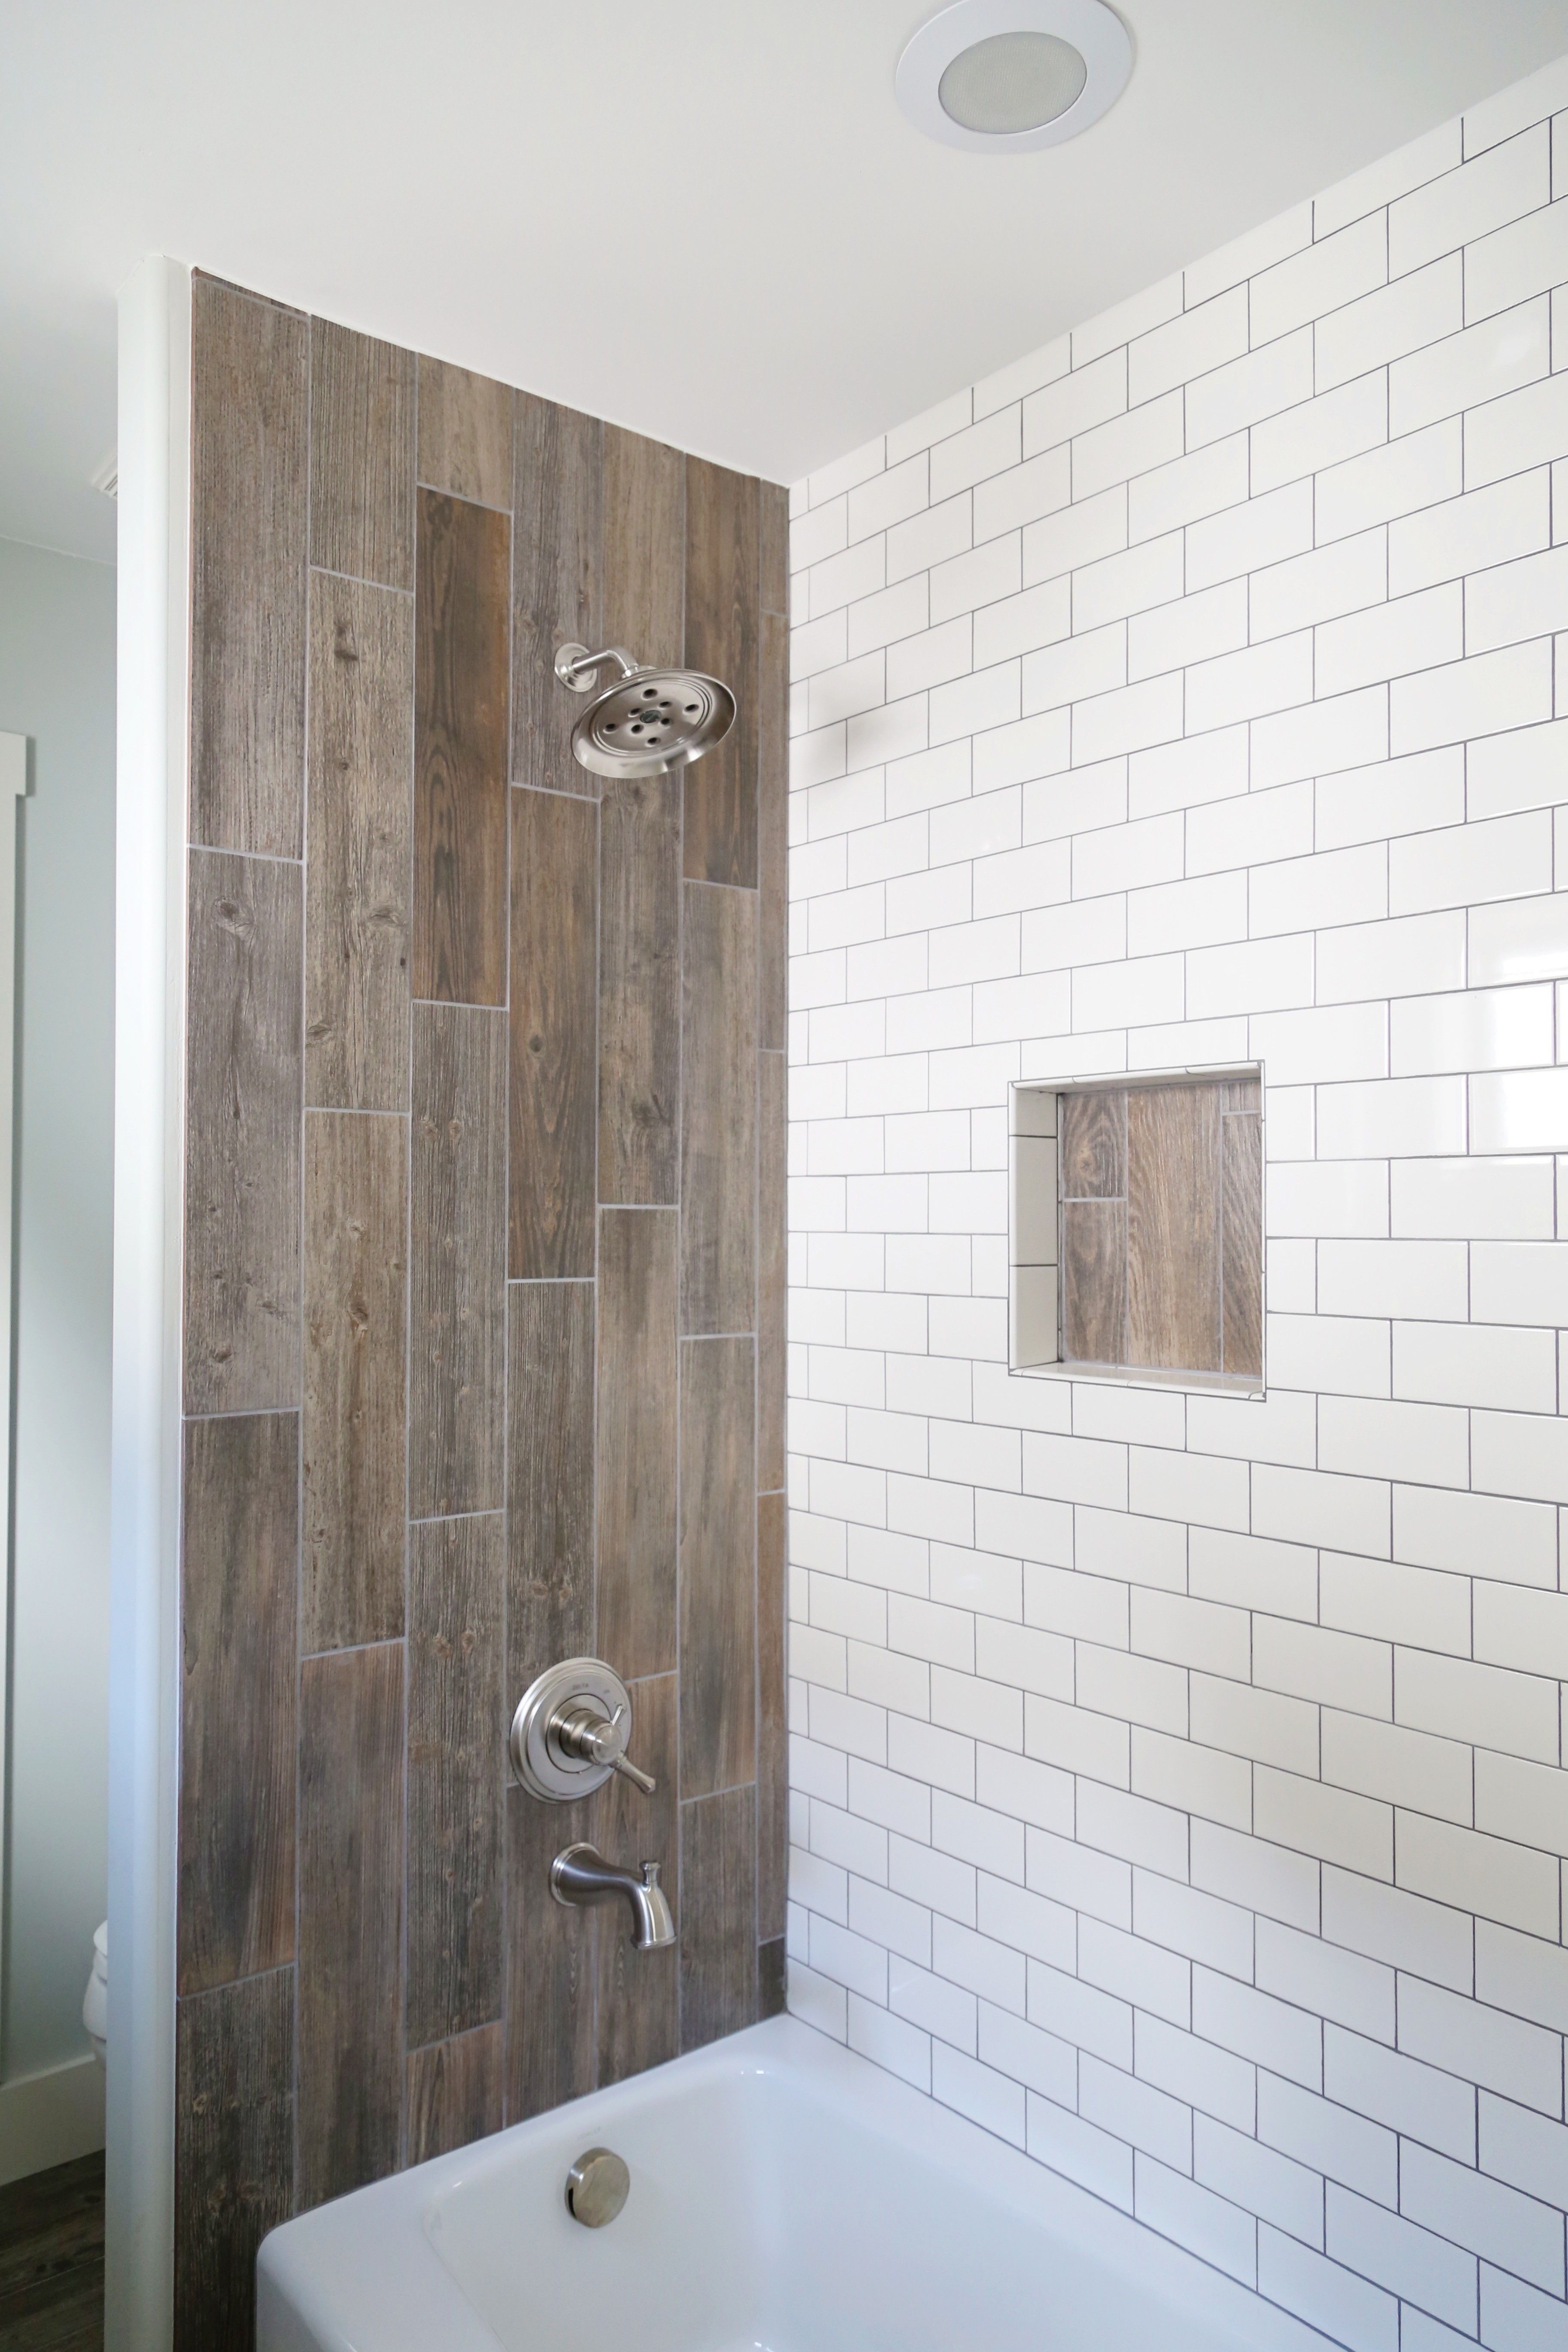 Farmhouse Bathroom Renovation Styled With Duk Liner Wood Tile within dimensions 3648 X 5472